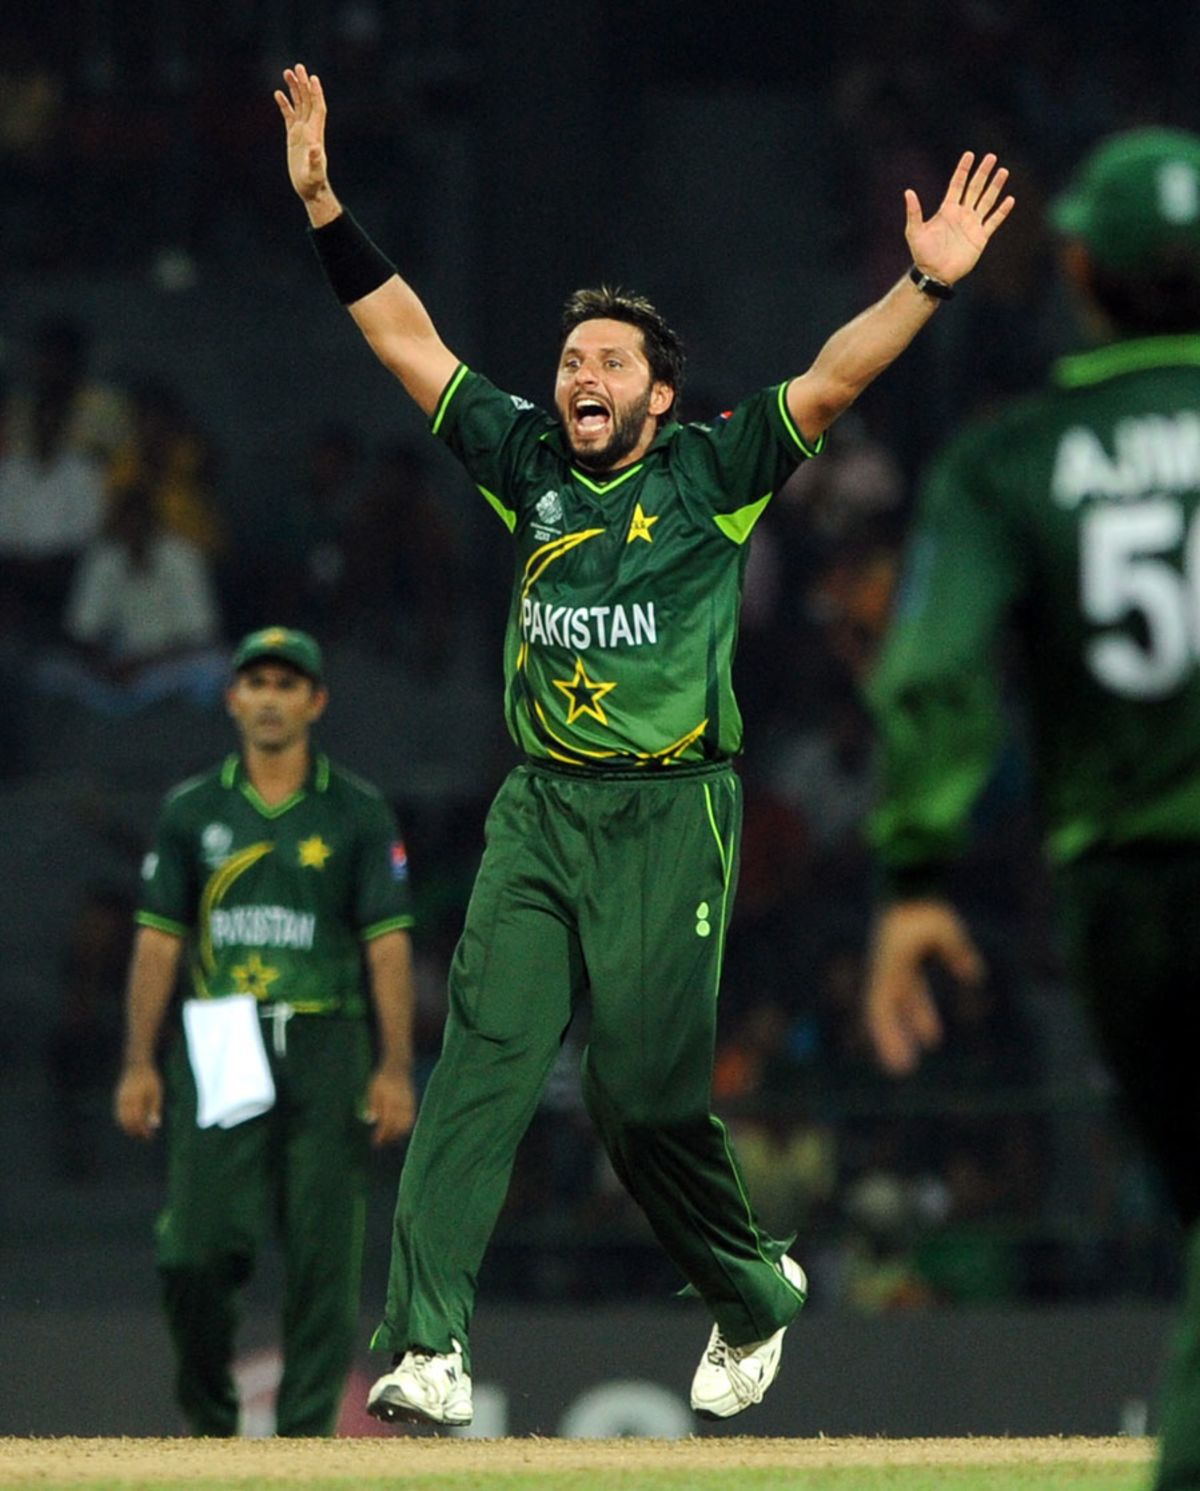 Shahid Afridi celebrates the wicket of Ashish Bagai, Canada v Pakistan, Group A, World Cup 2011, Colombo, March 3, 2011